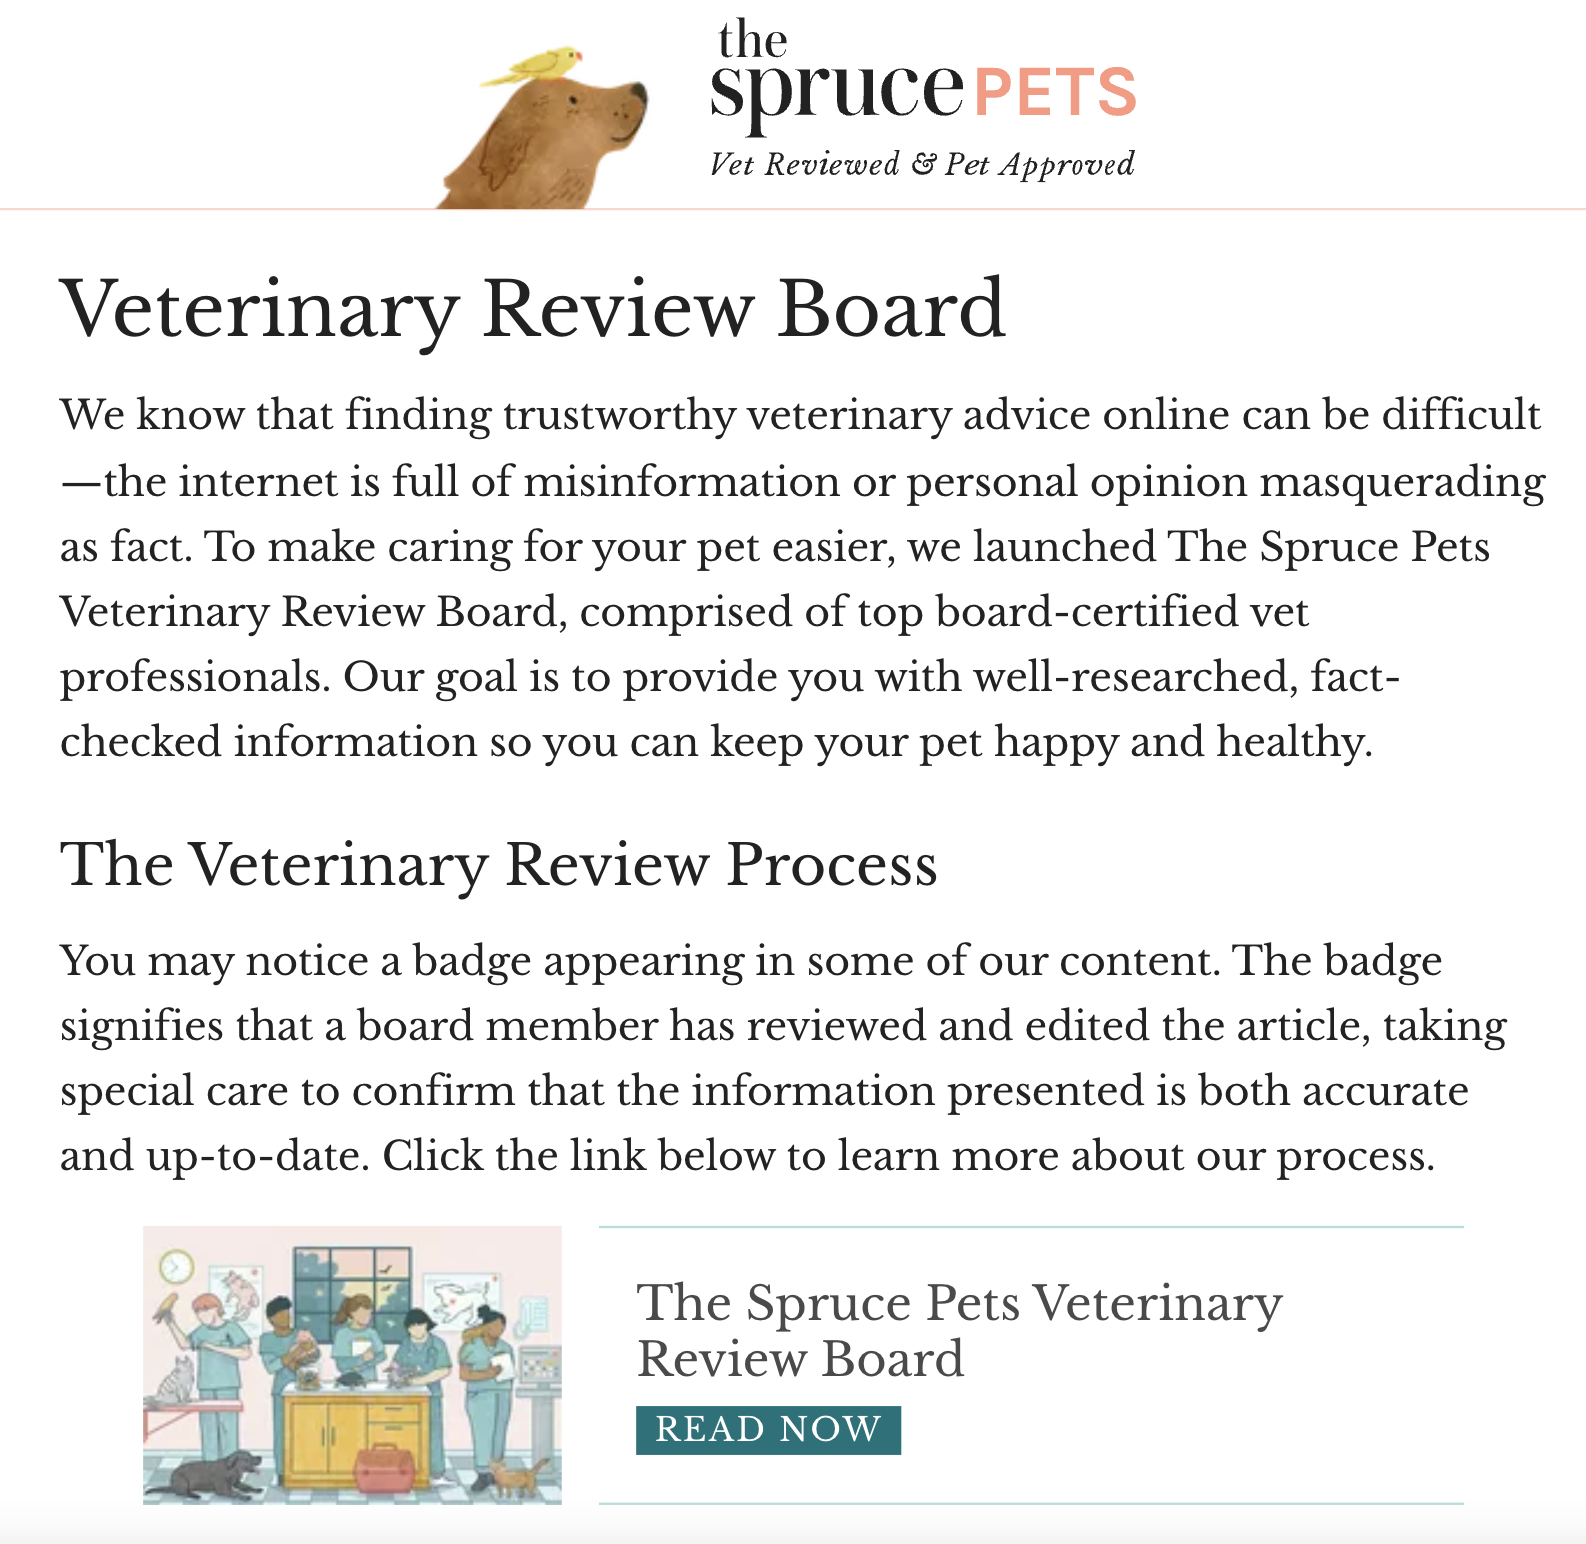 "The Spruce Pets" website